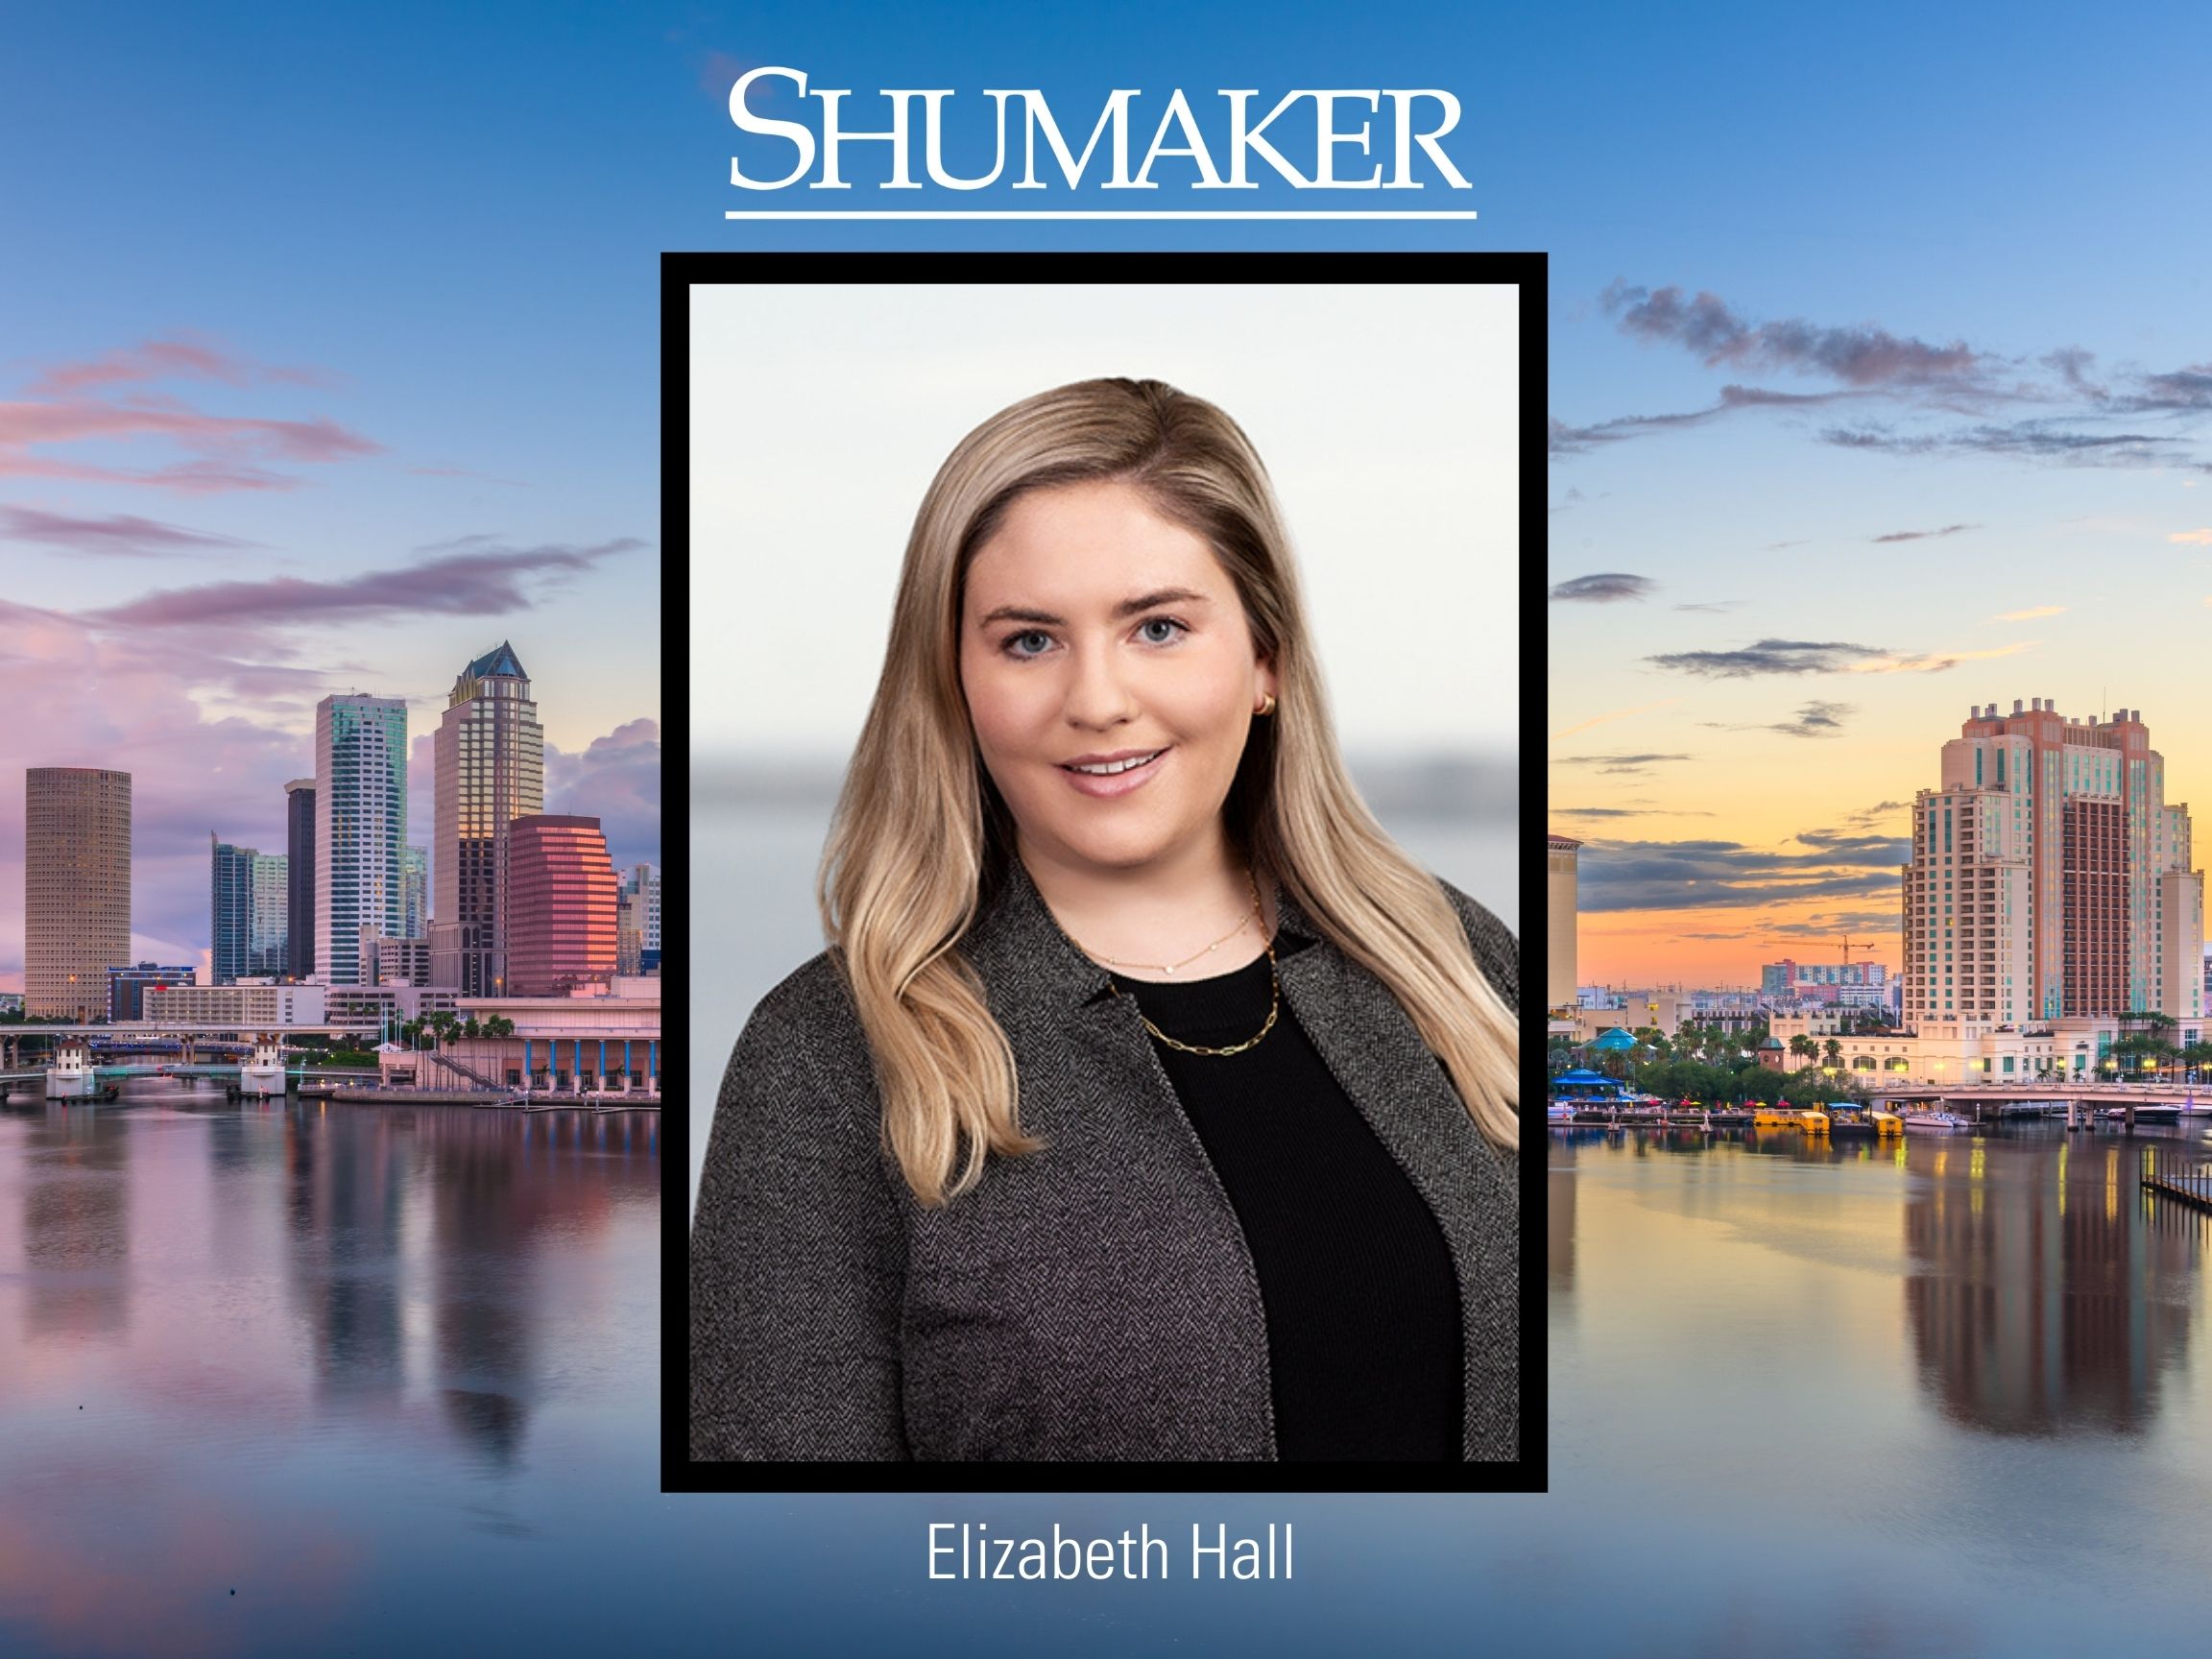 Growth Continues for Shumaker’s Community Associations Business Sector with Addition of Elizabeth Hall